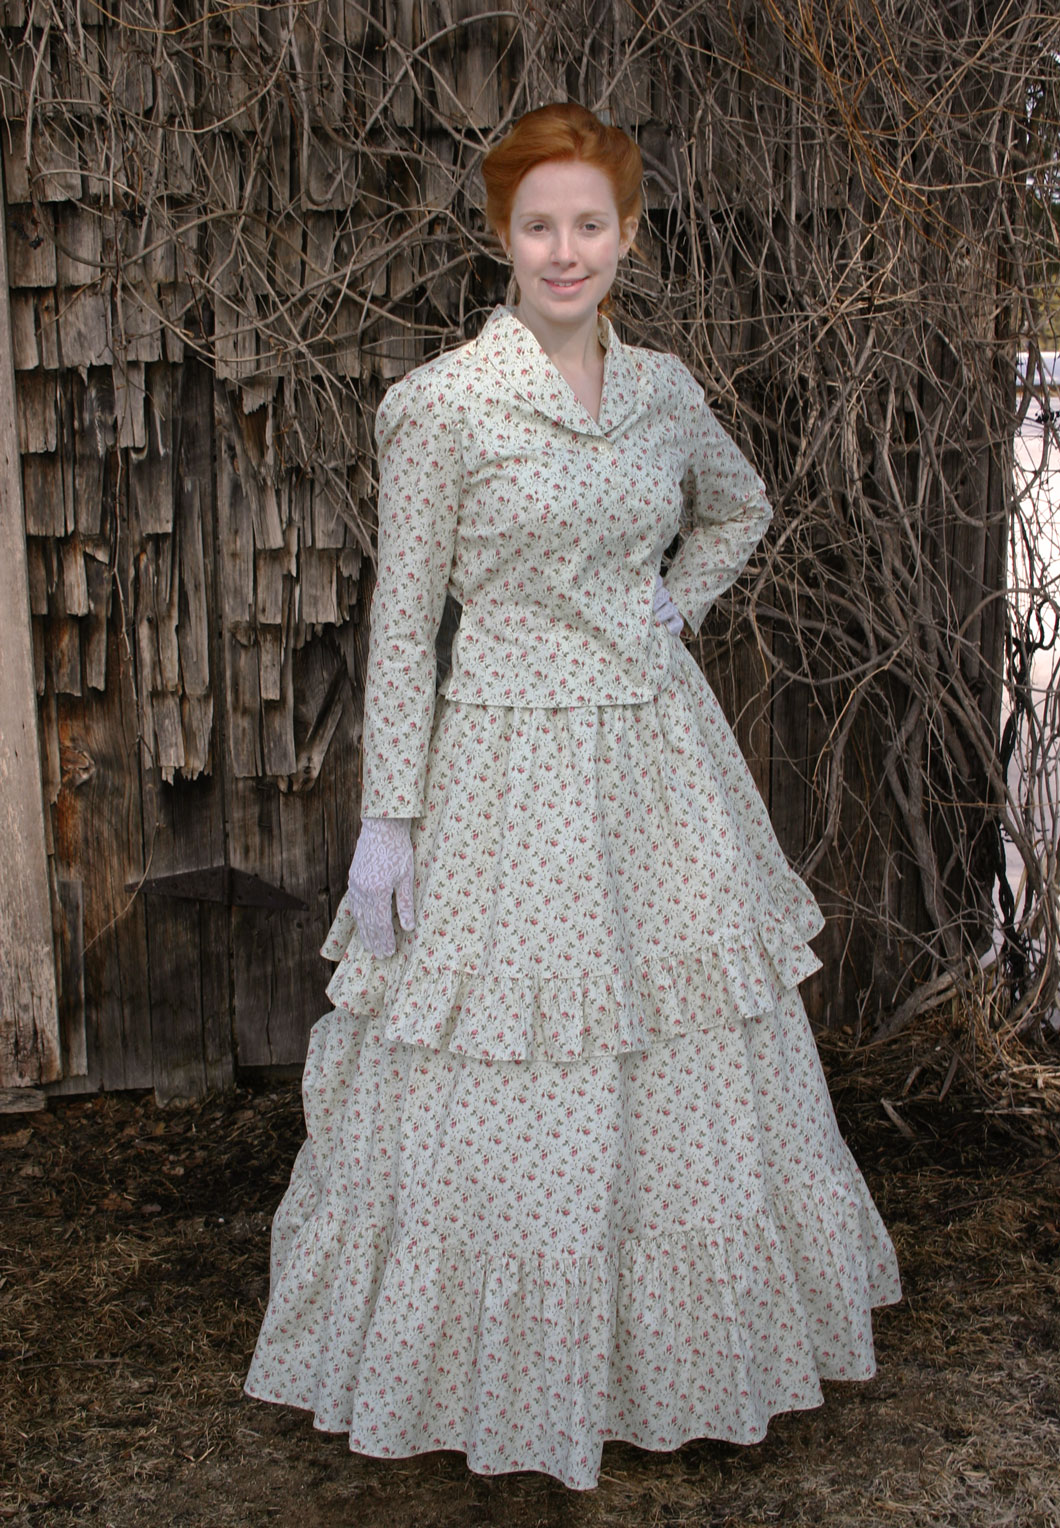 Josepha Victorian Print Jacket and Skirt | Recollections